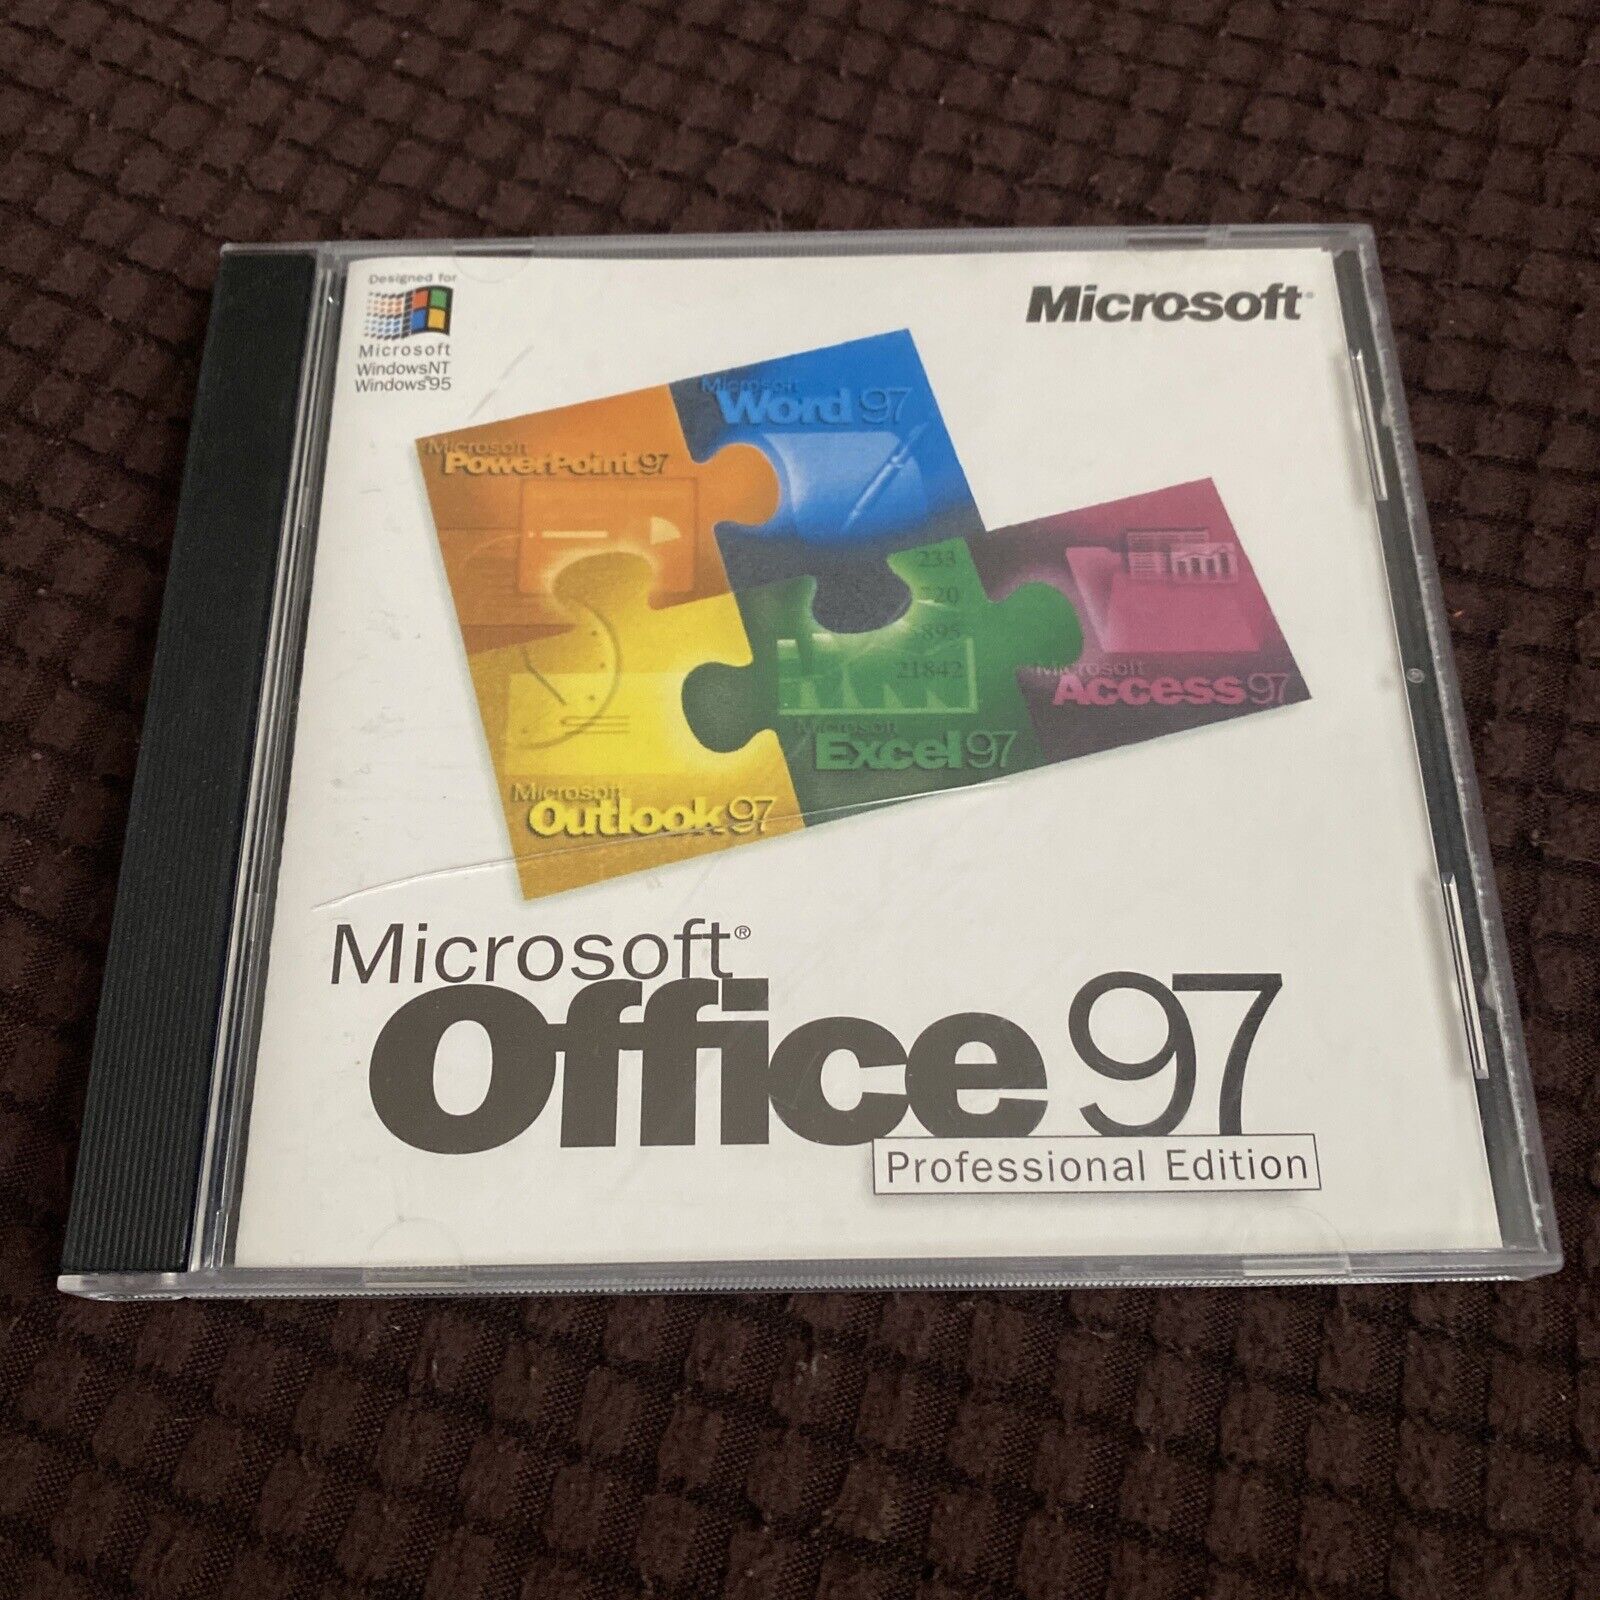 Microsoft Office 97 Professional Edition with CD Key